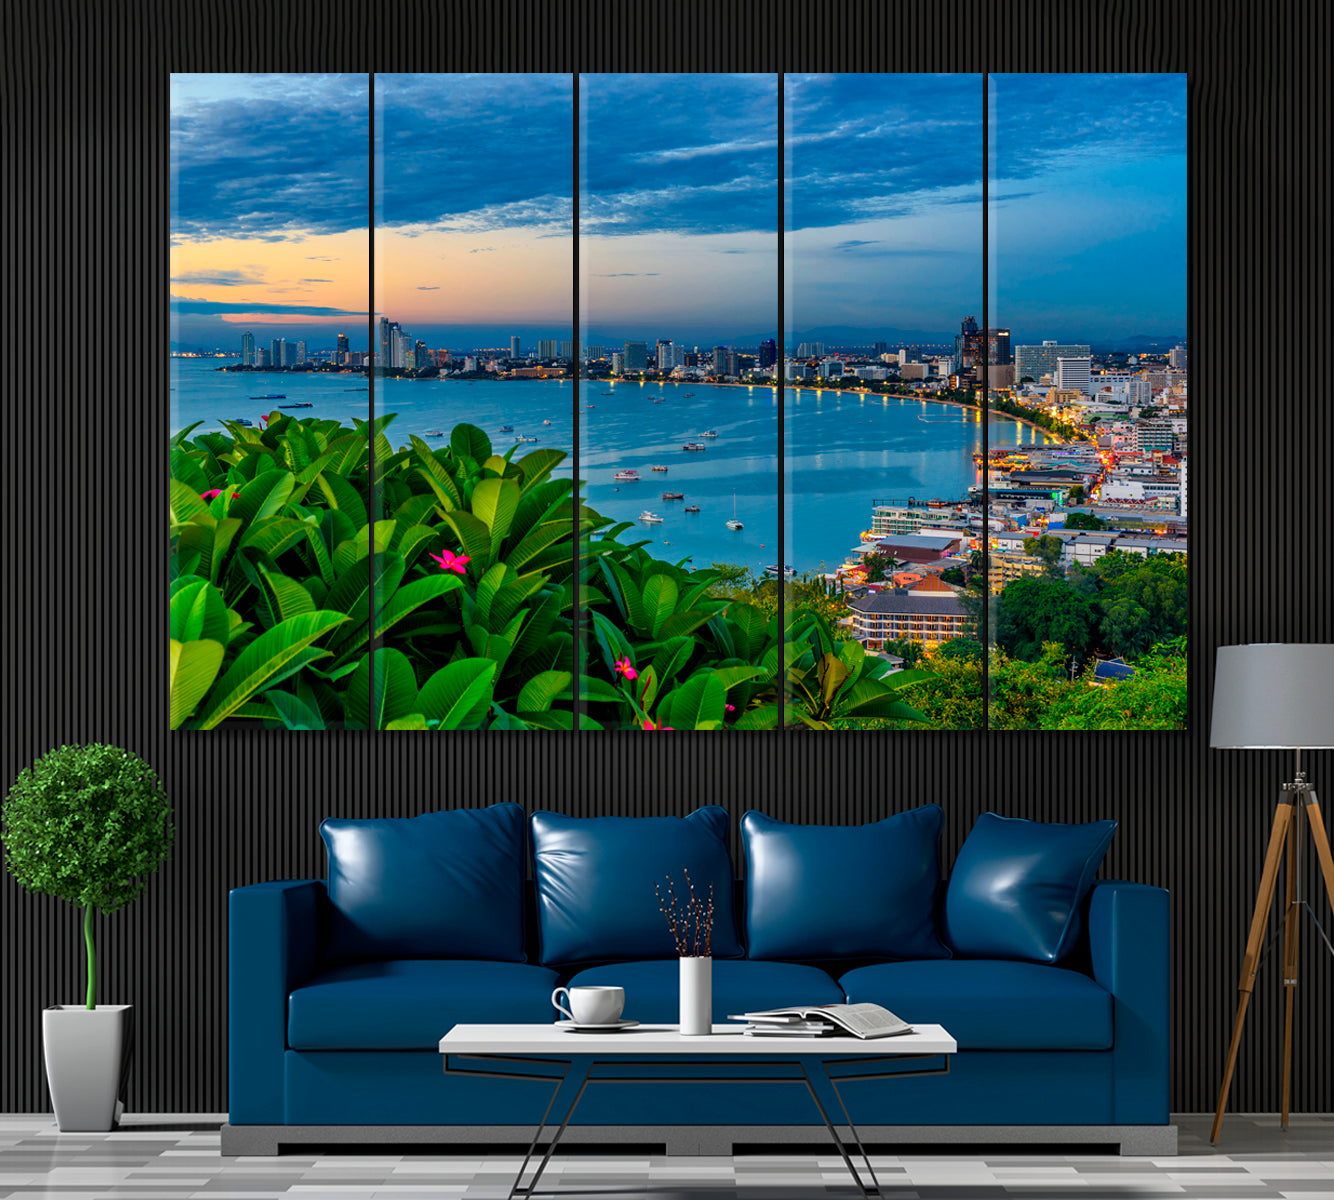 Pattaya Skyscrapers Thailand Canvas Print ArtLexy 5 Panels 36"x24" inches 